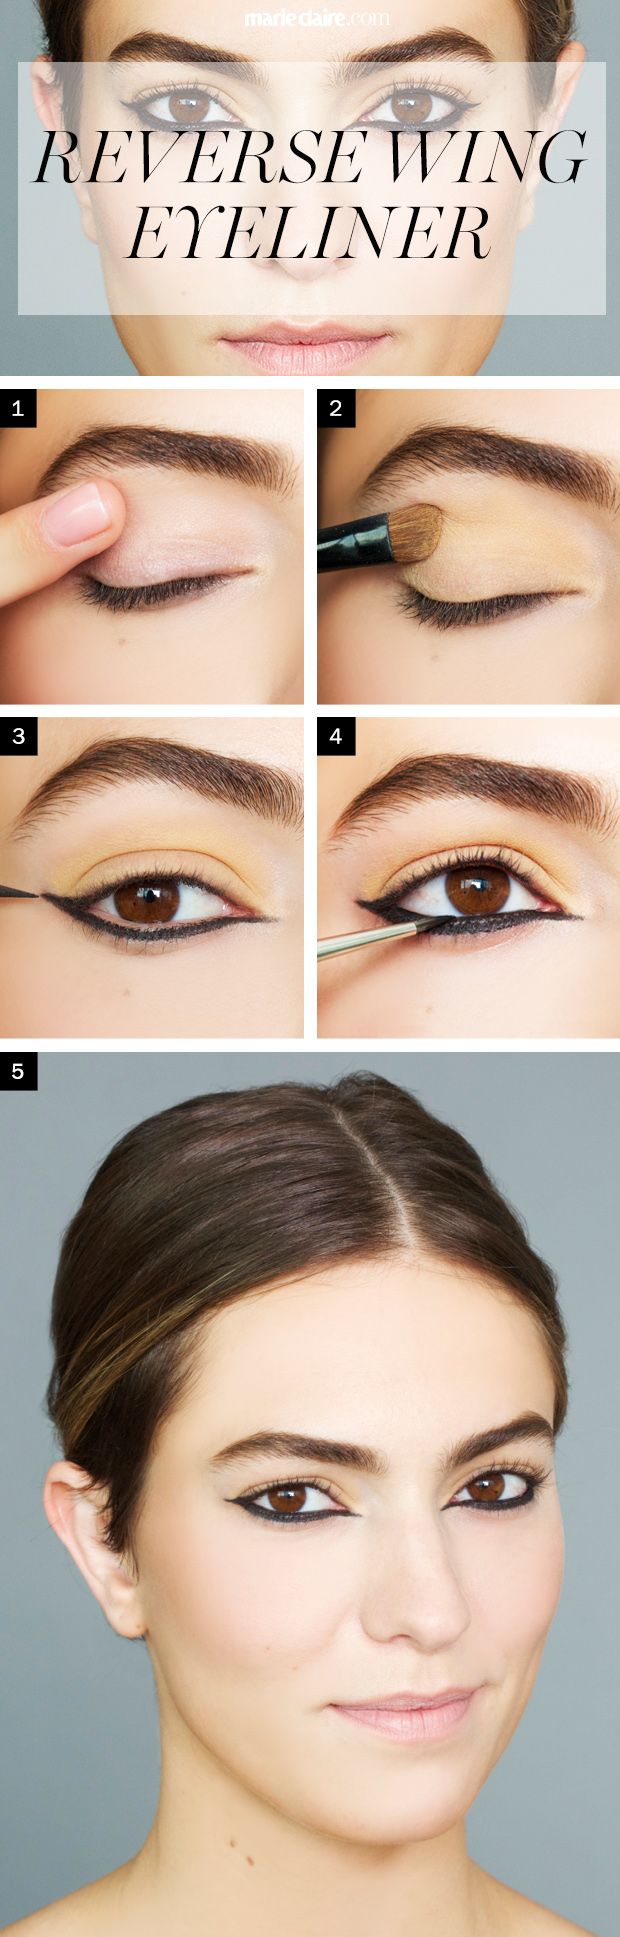 16 Makeup Tricks For Flawless Look Every Woman Should Know (7)